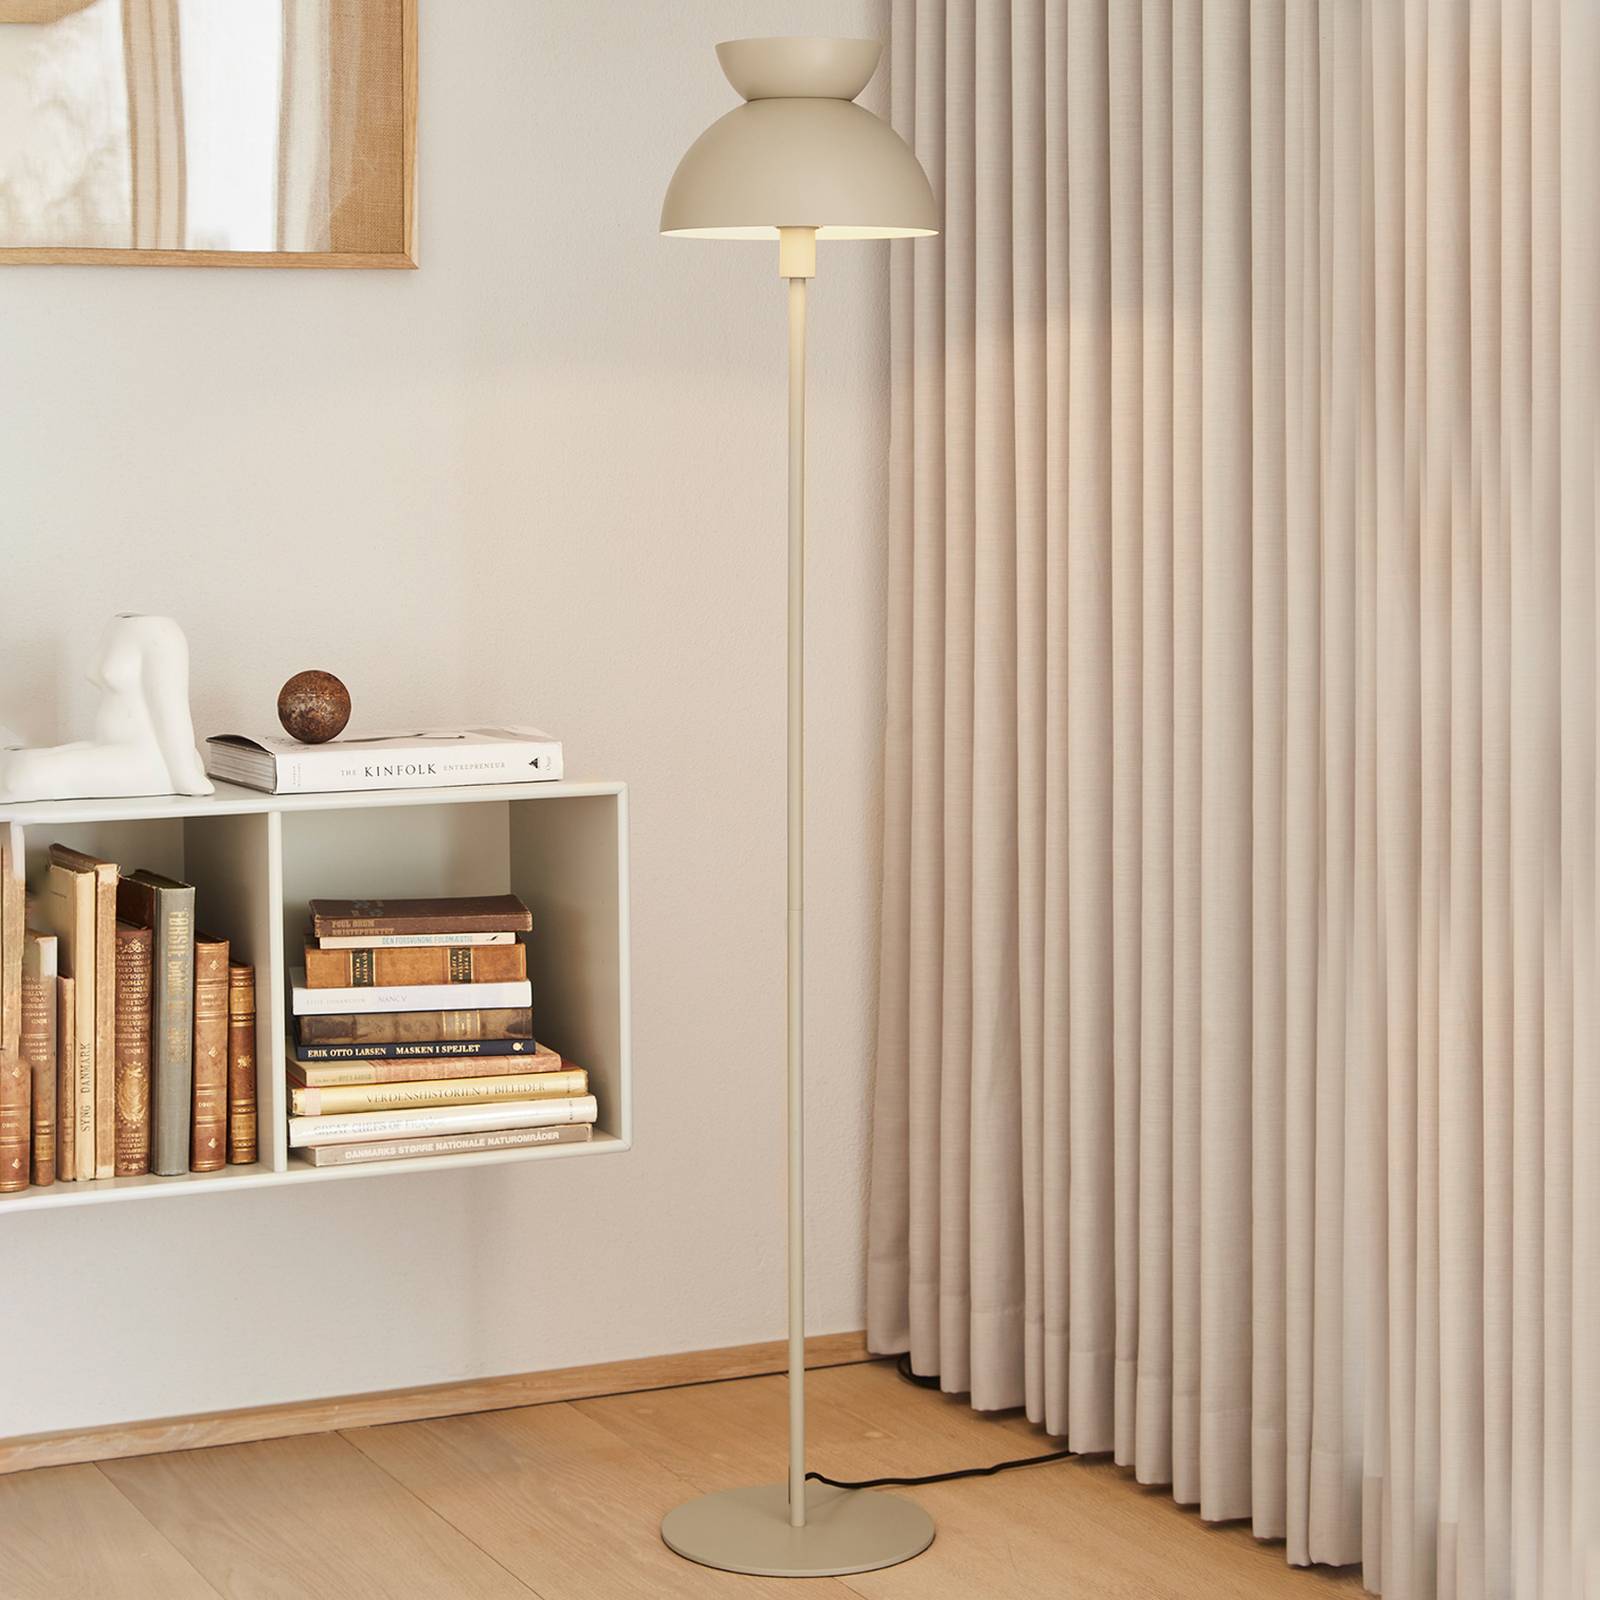 Image of FRANDSEN Butterfly lampadaire gris, commande pied 5702410487185